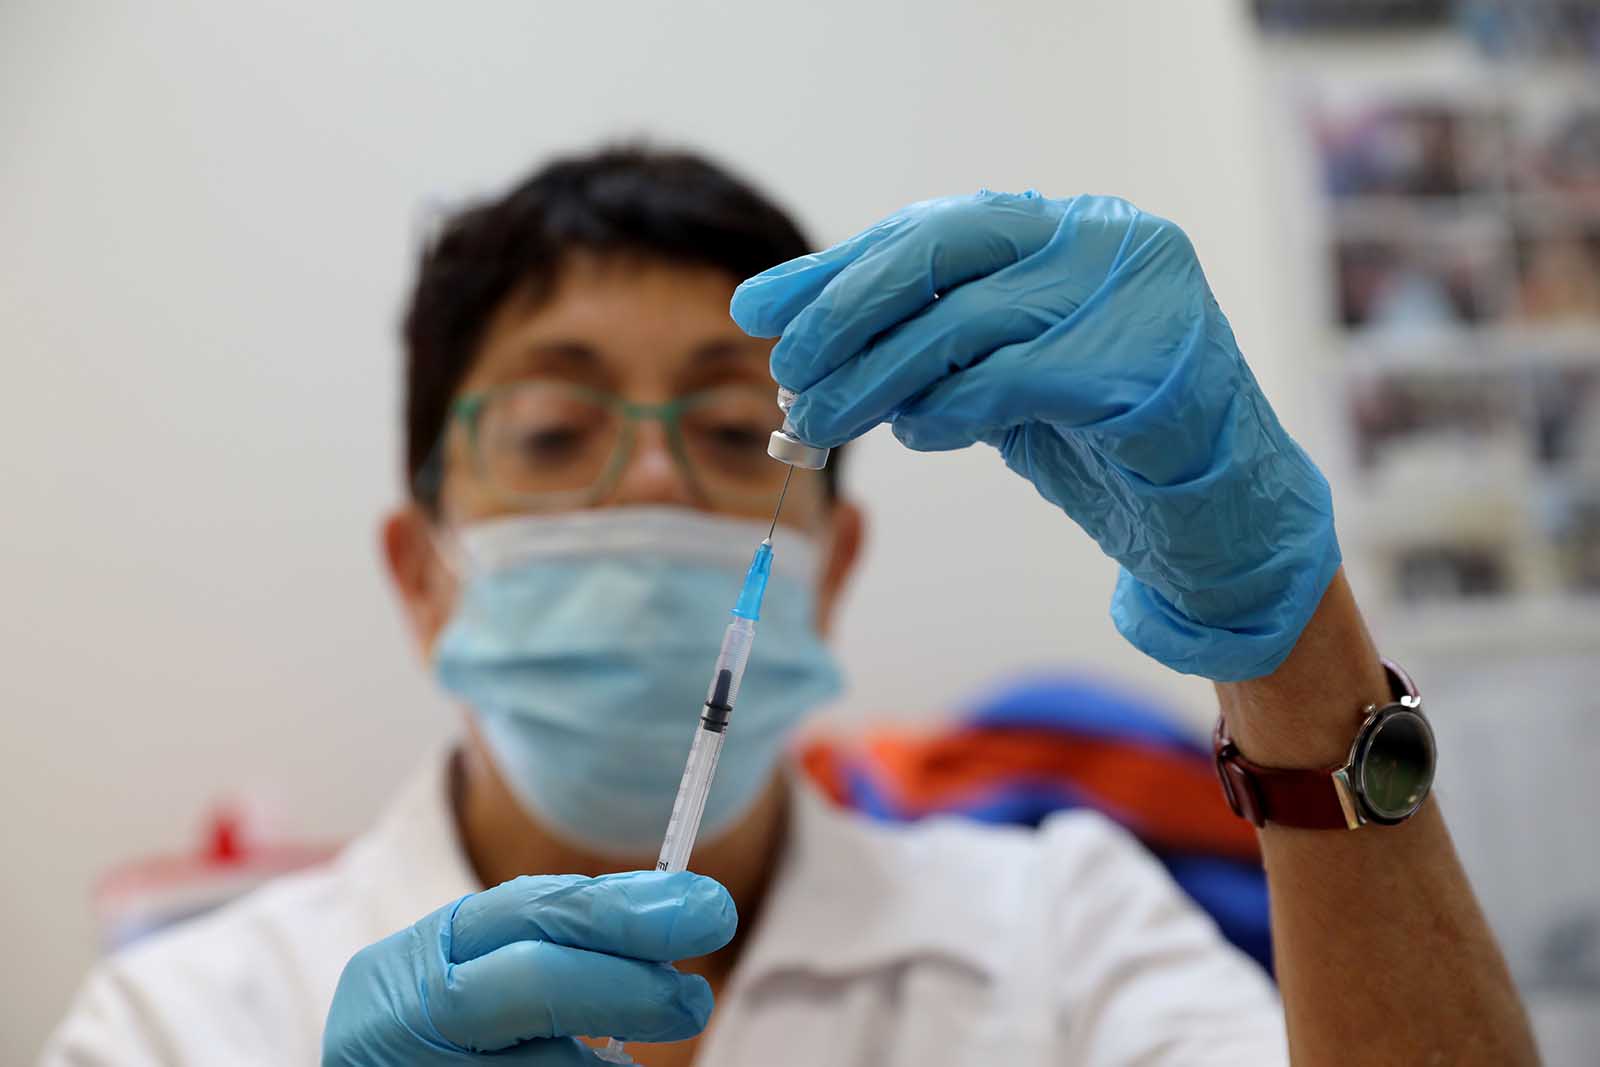 A medical worker prepares a dose of the COVID-19 vaccine at a healthcare center in Modiin, Israel, on July 5.